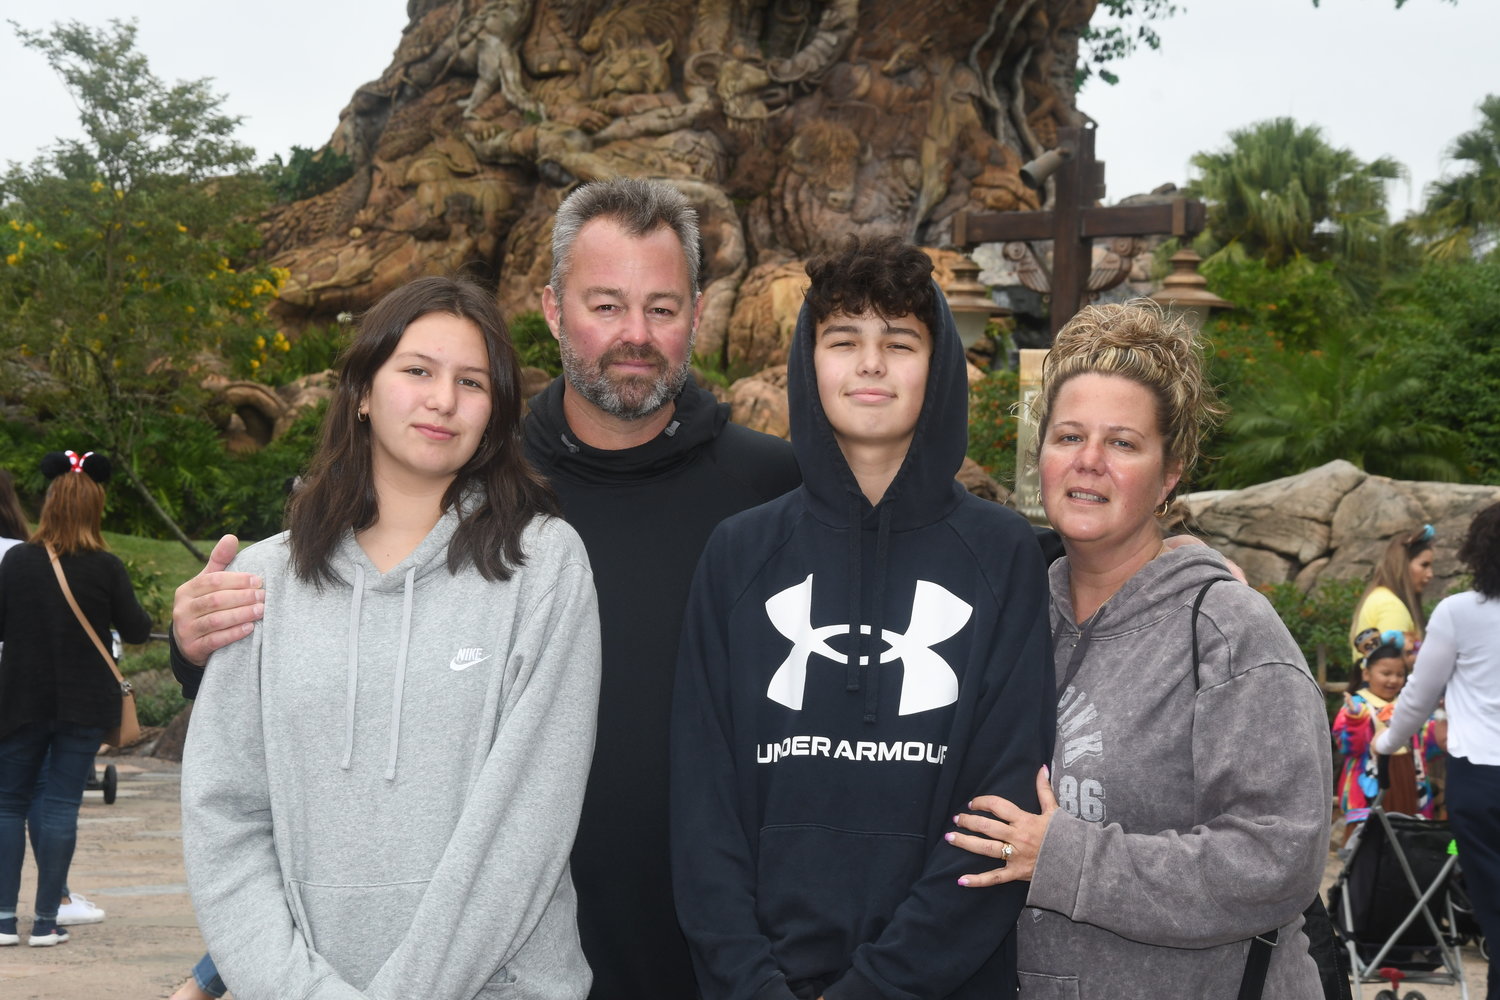 Dino Komis, second from left, died in June. Dino, his wife, Rose, far right, and their children, Teddy, 14, and Nina, 12, visited Disney World last November.